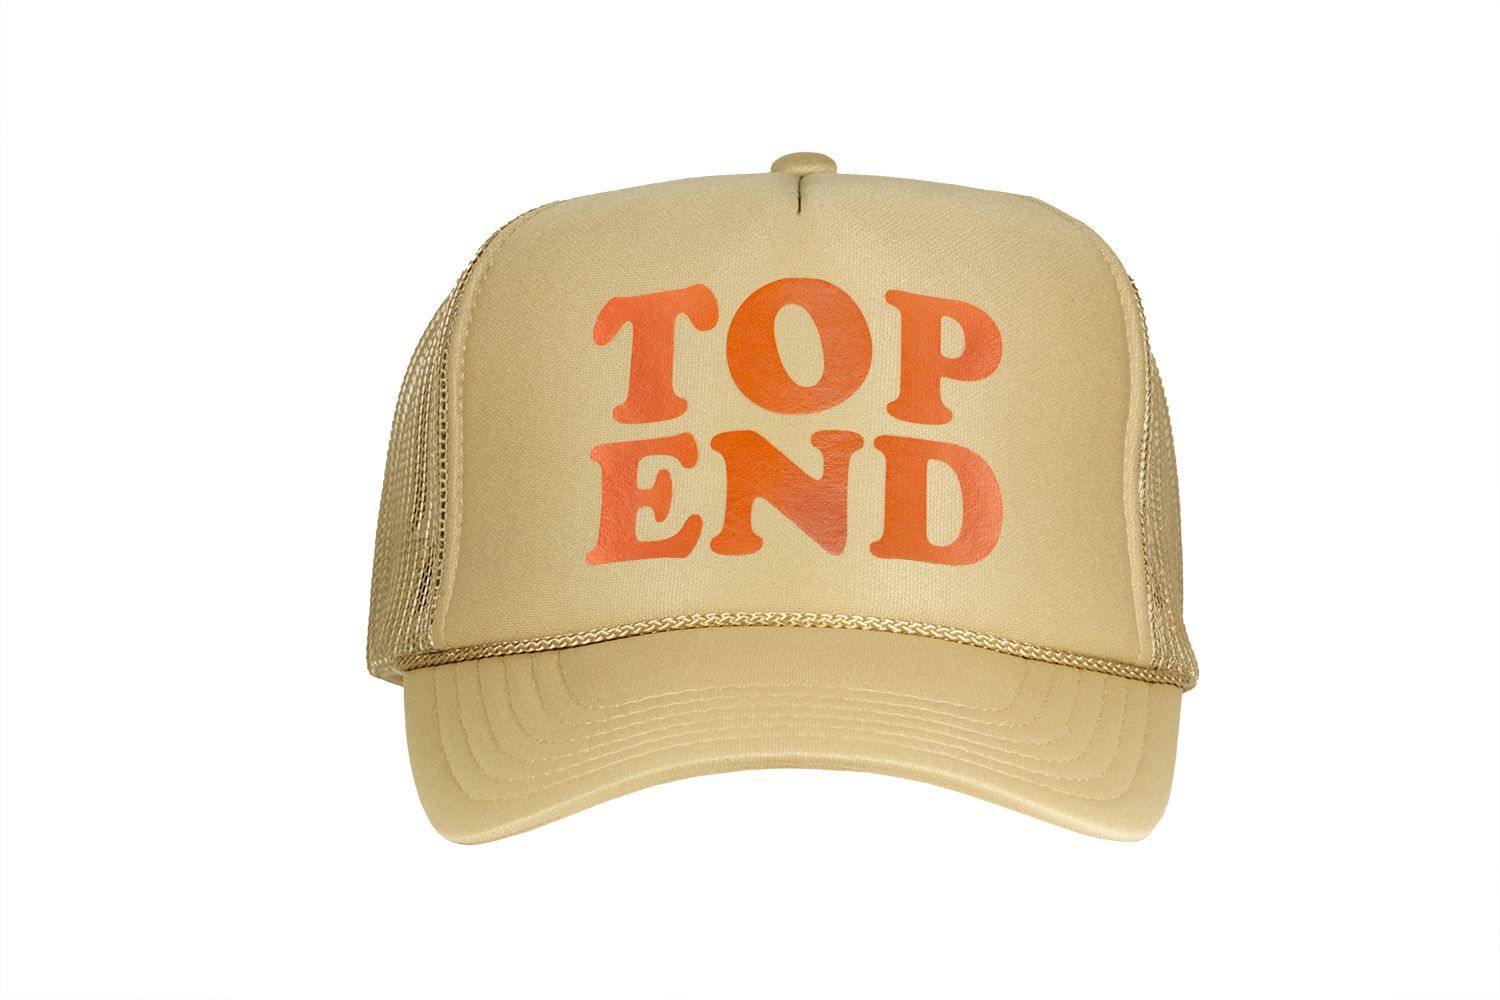 Northern Territory Top End high crown trucker cap with mesh back and snapback - Tropic Trucker Australia®